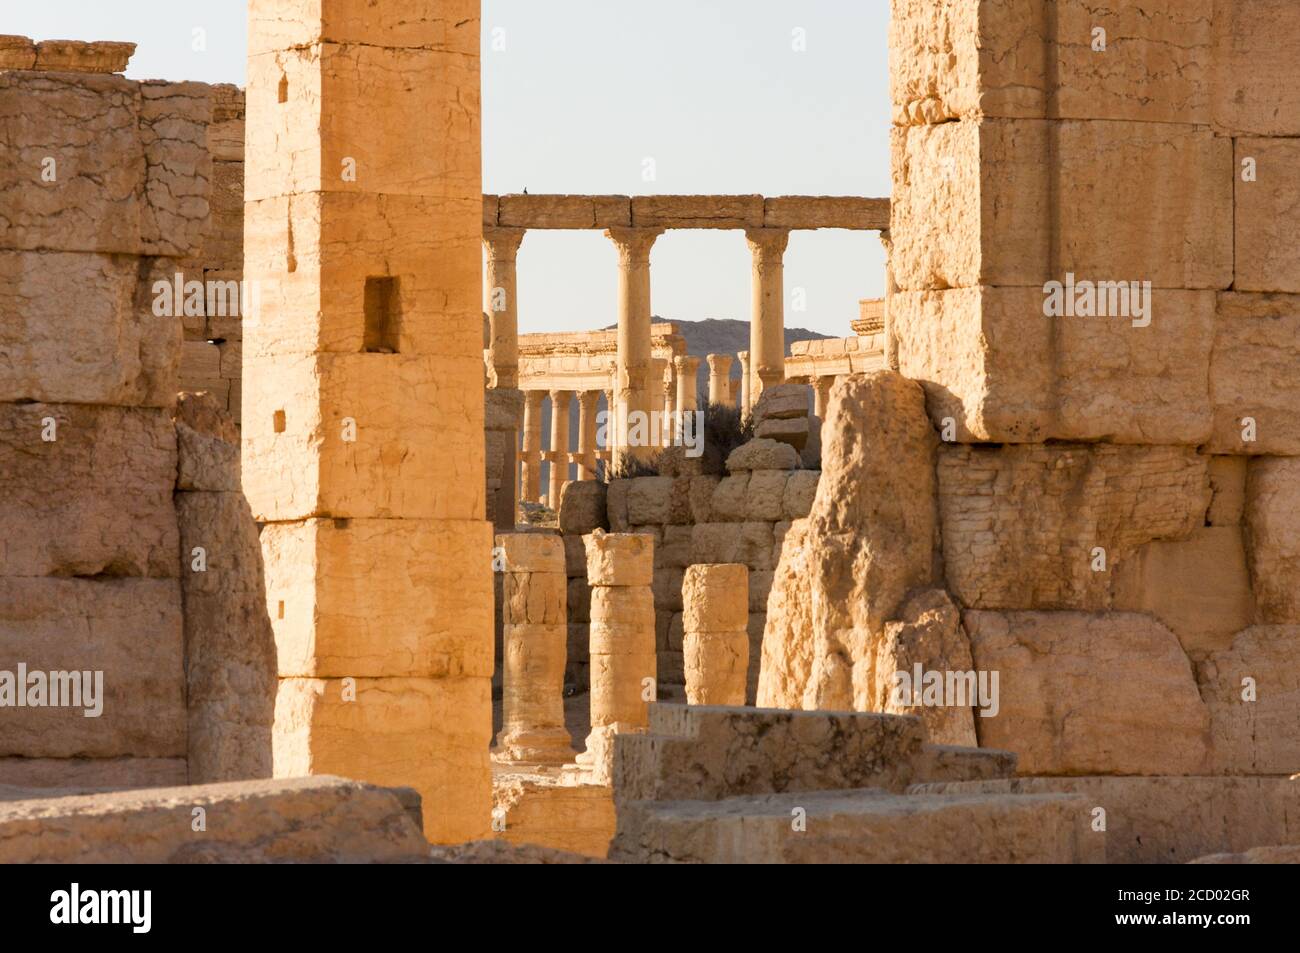 Palmyre Syria 2009 The ruins of an ancient city dating from the Roman period Stock Photo